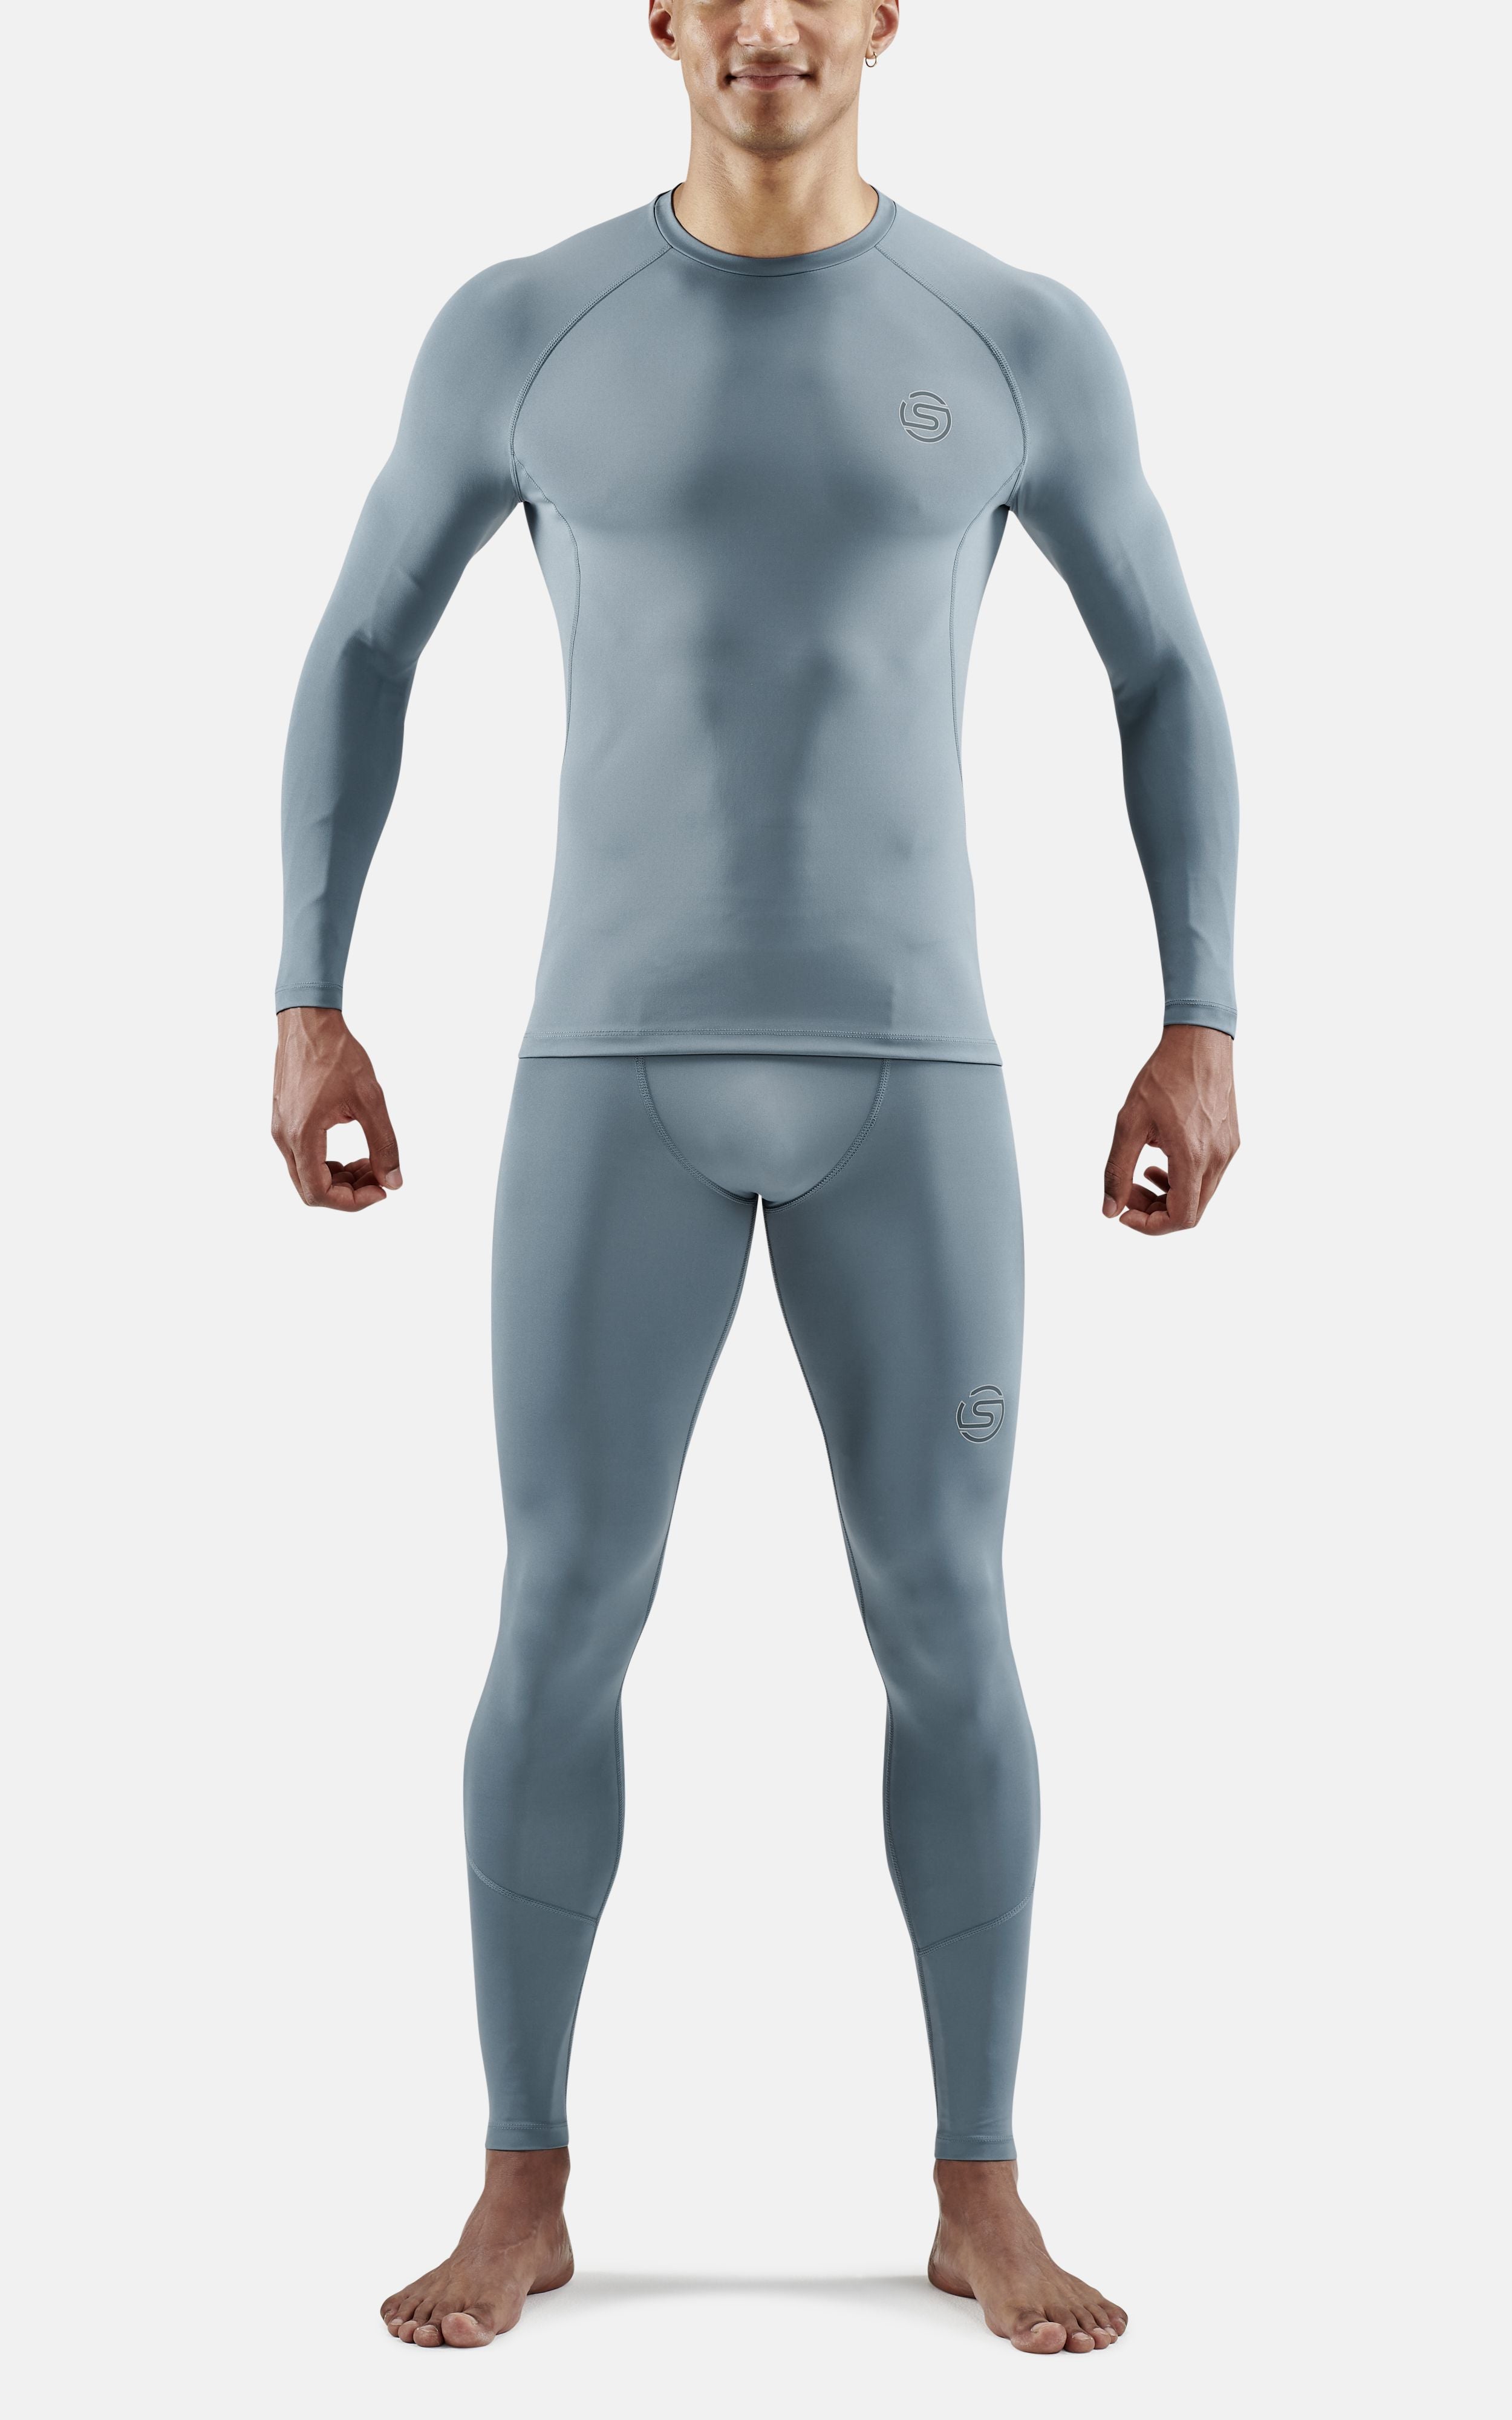 Stay warm and stylish with the SKINS A200 Thermal Compression Suit